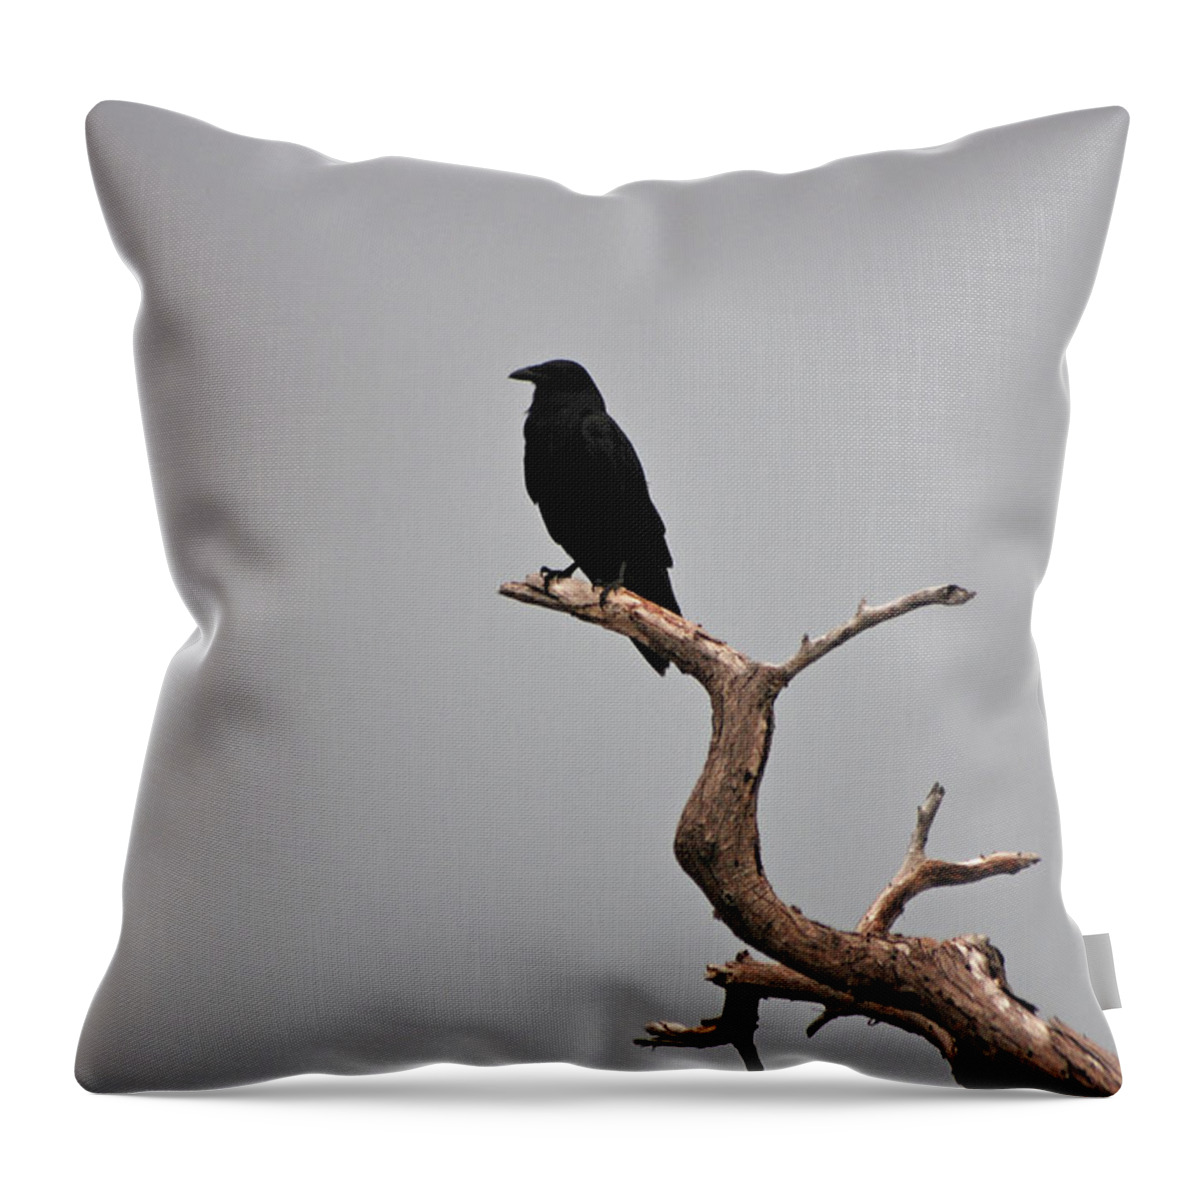 Black Crow Throw Pillow featuring the photograph 30- Black Crow by Joseph Keane